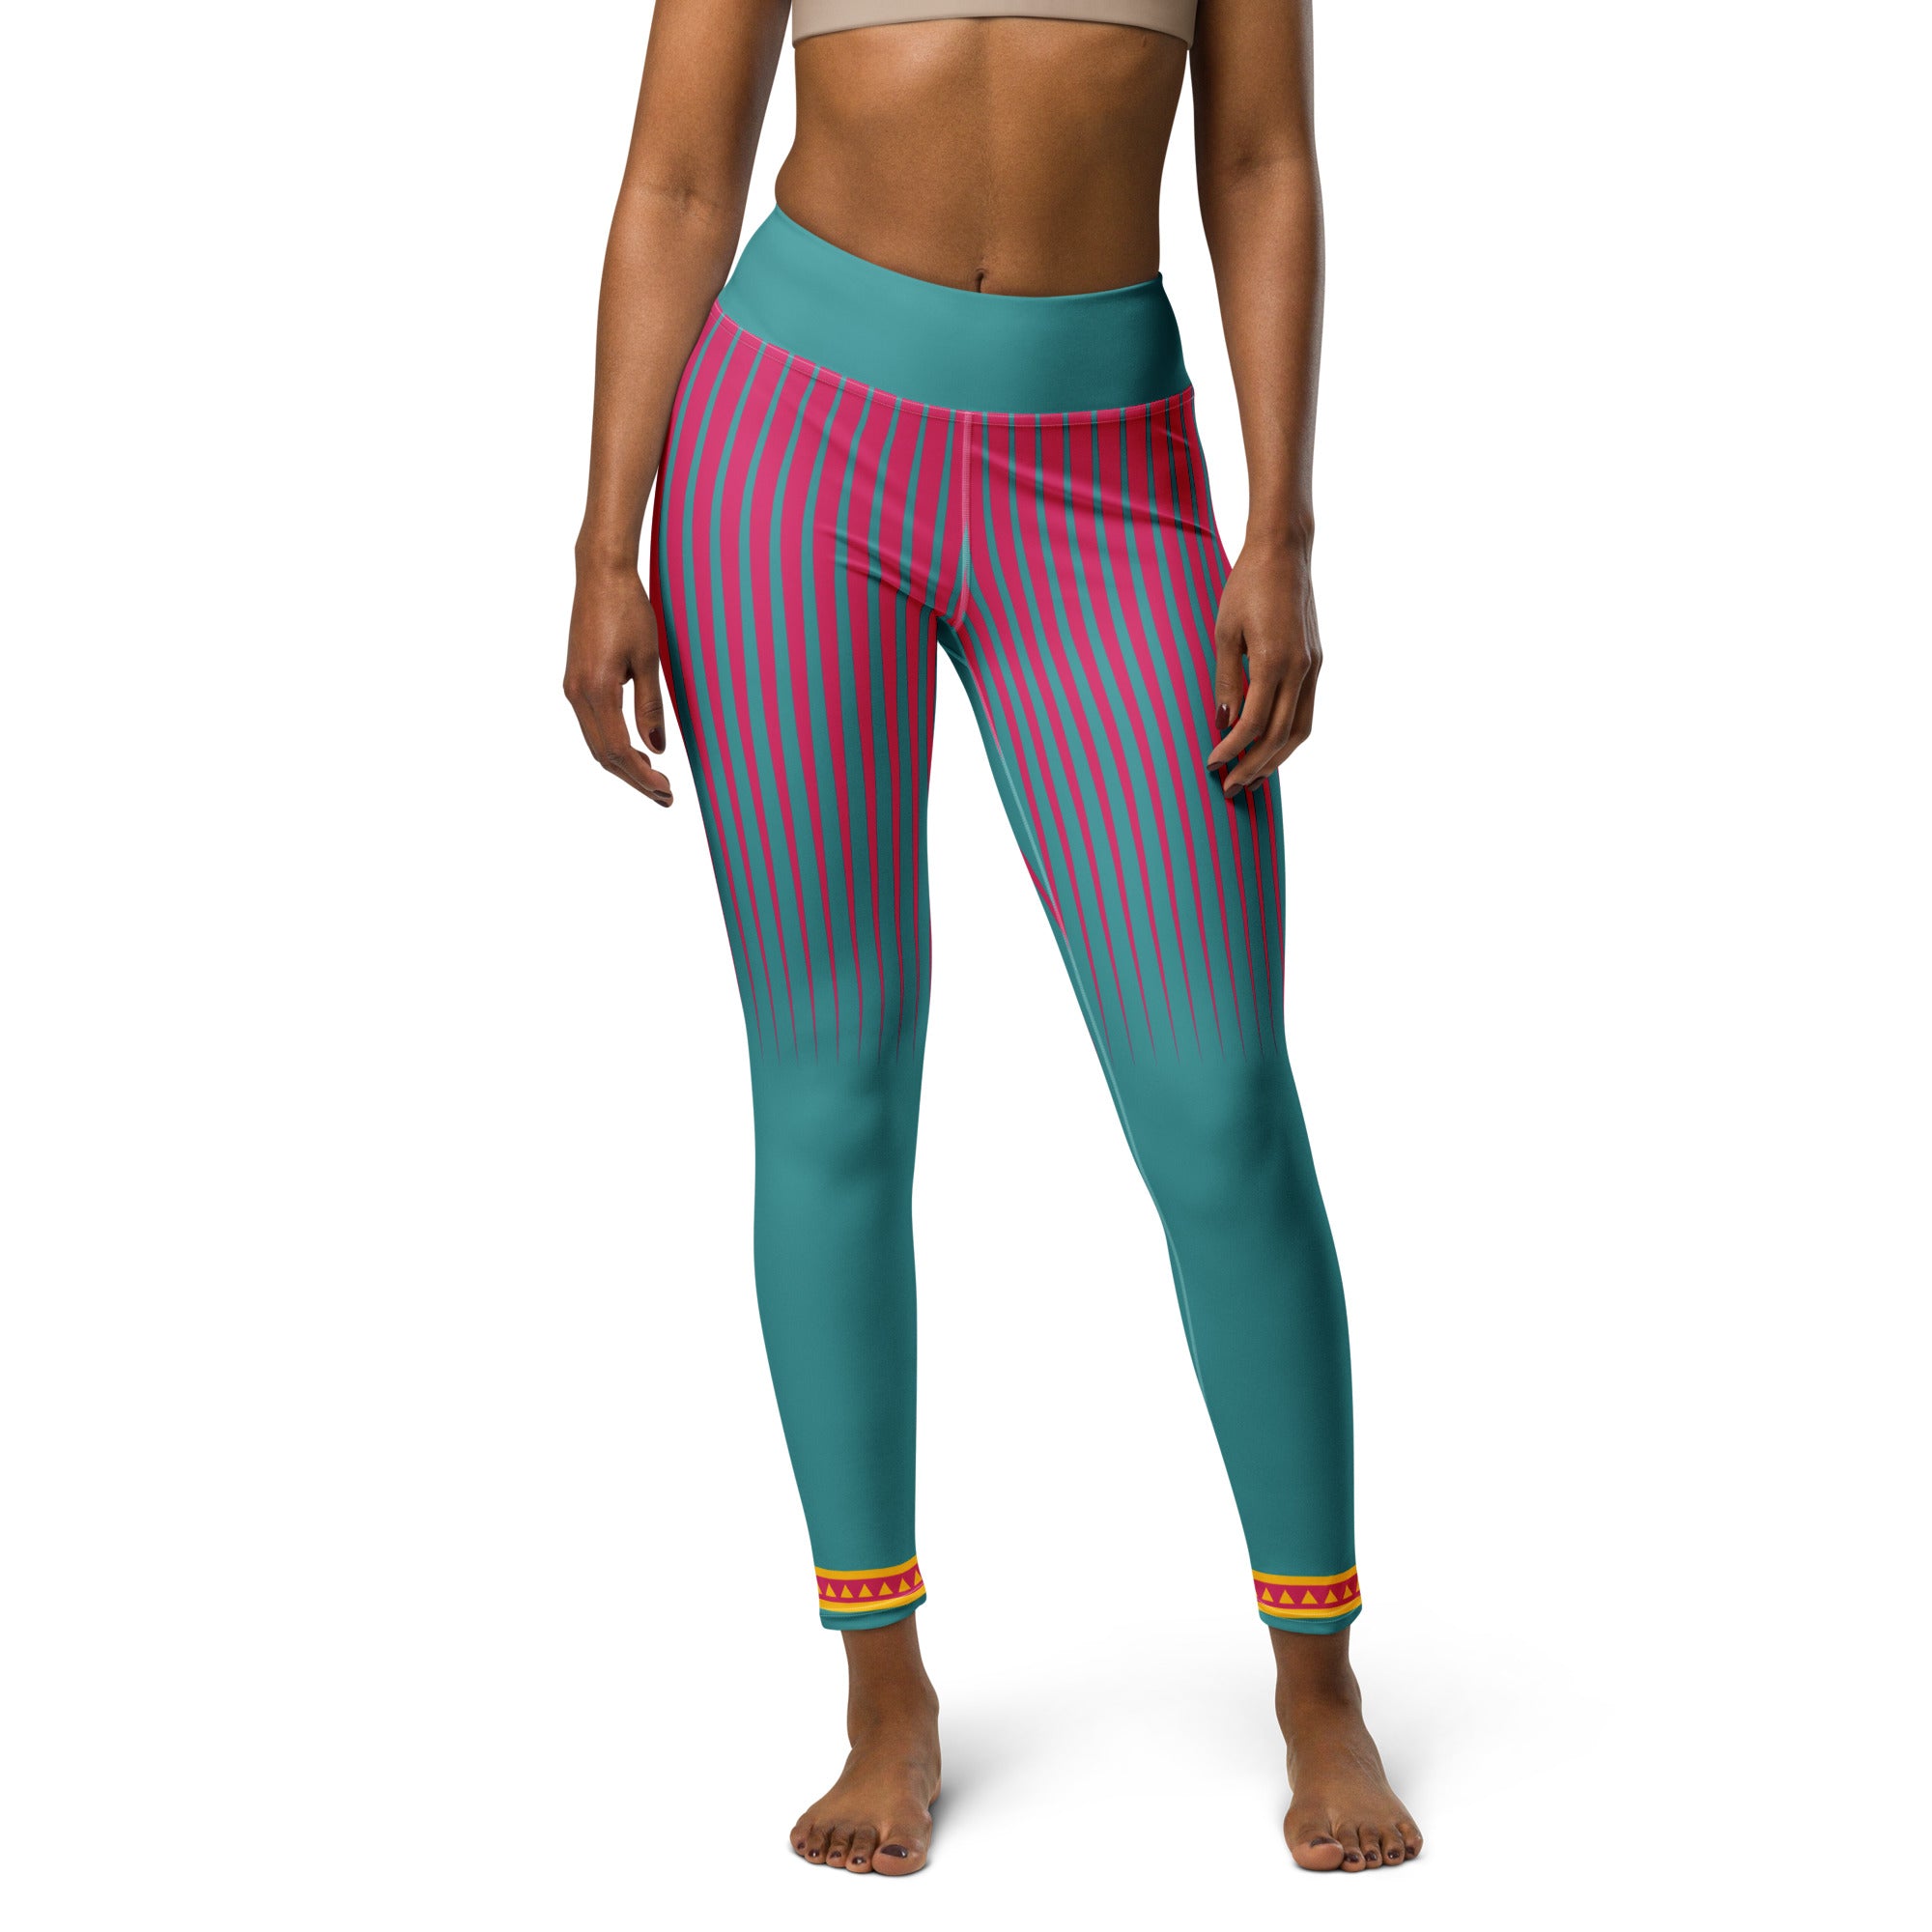 Sapphire Serenity Yoga Leggings displayed on a model in a yoga pose.